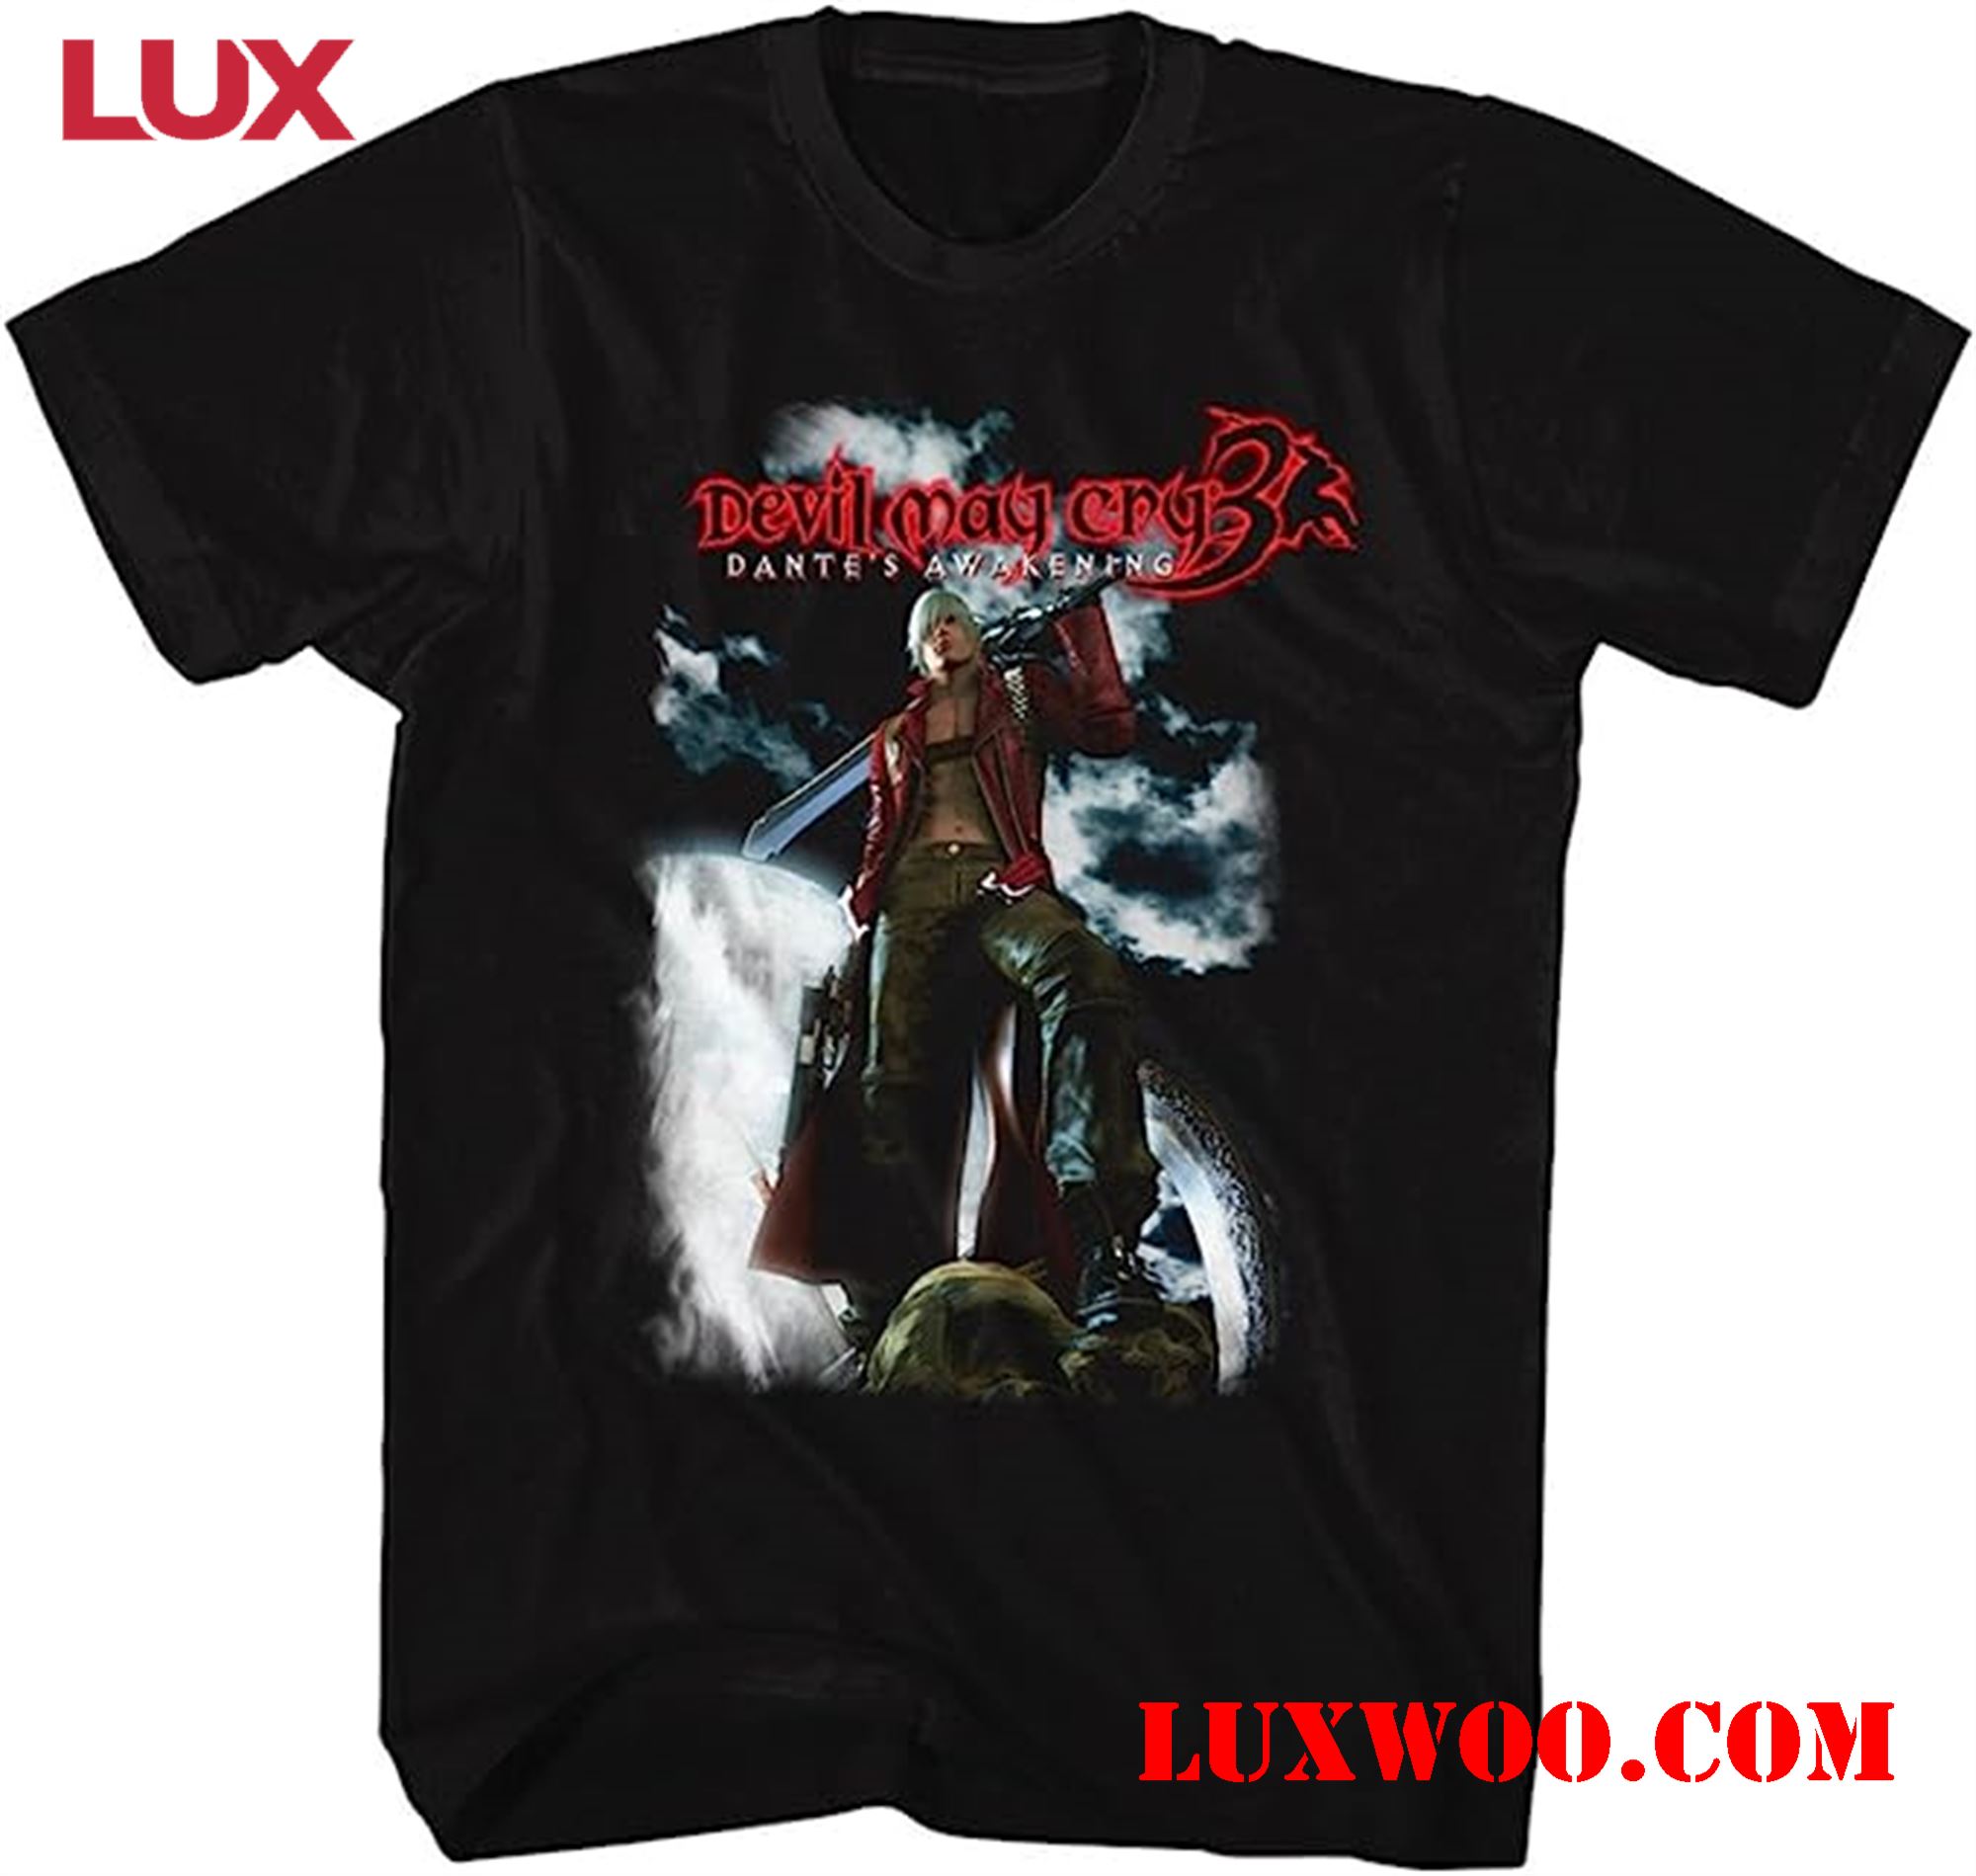 Promotions A E Designs Devil May Cry 3 Video Game Shirt Dantes Awakening T-shirt